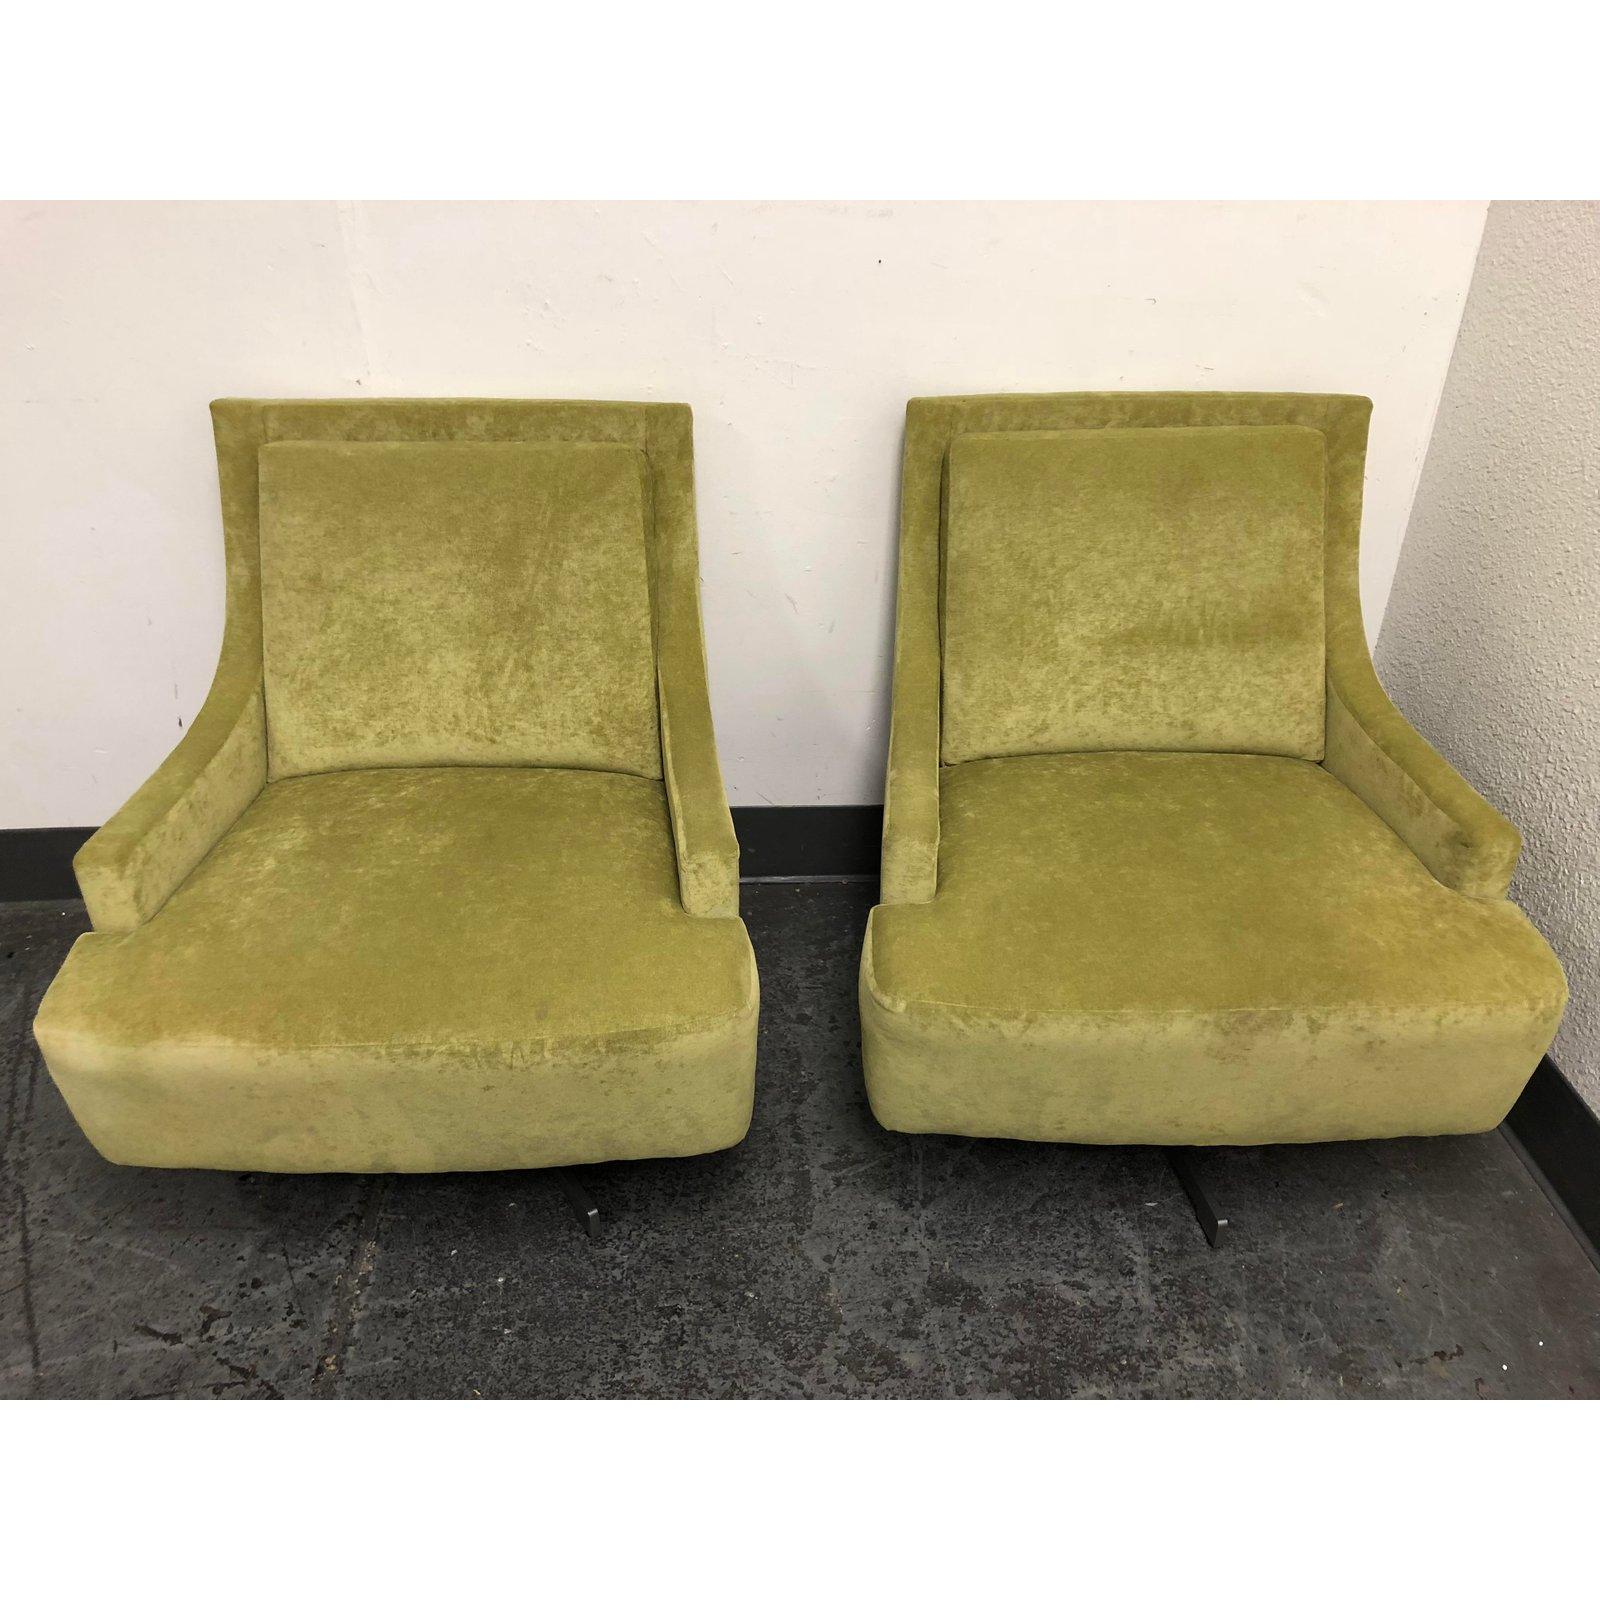 A pair of Barbara Barry Scoop chairs from HBF. Upholstered in a pastel green with vibrant sheen. Subtle curves and sloped lines deliver an overall smooth appearance simultaneously Classic and fresh. The four pronged base swivels and self-centres.